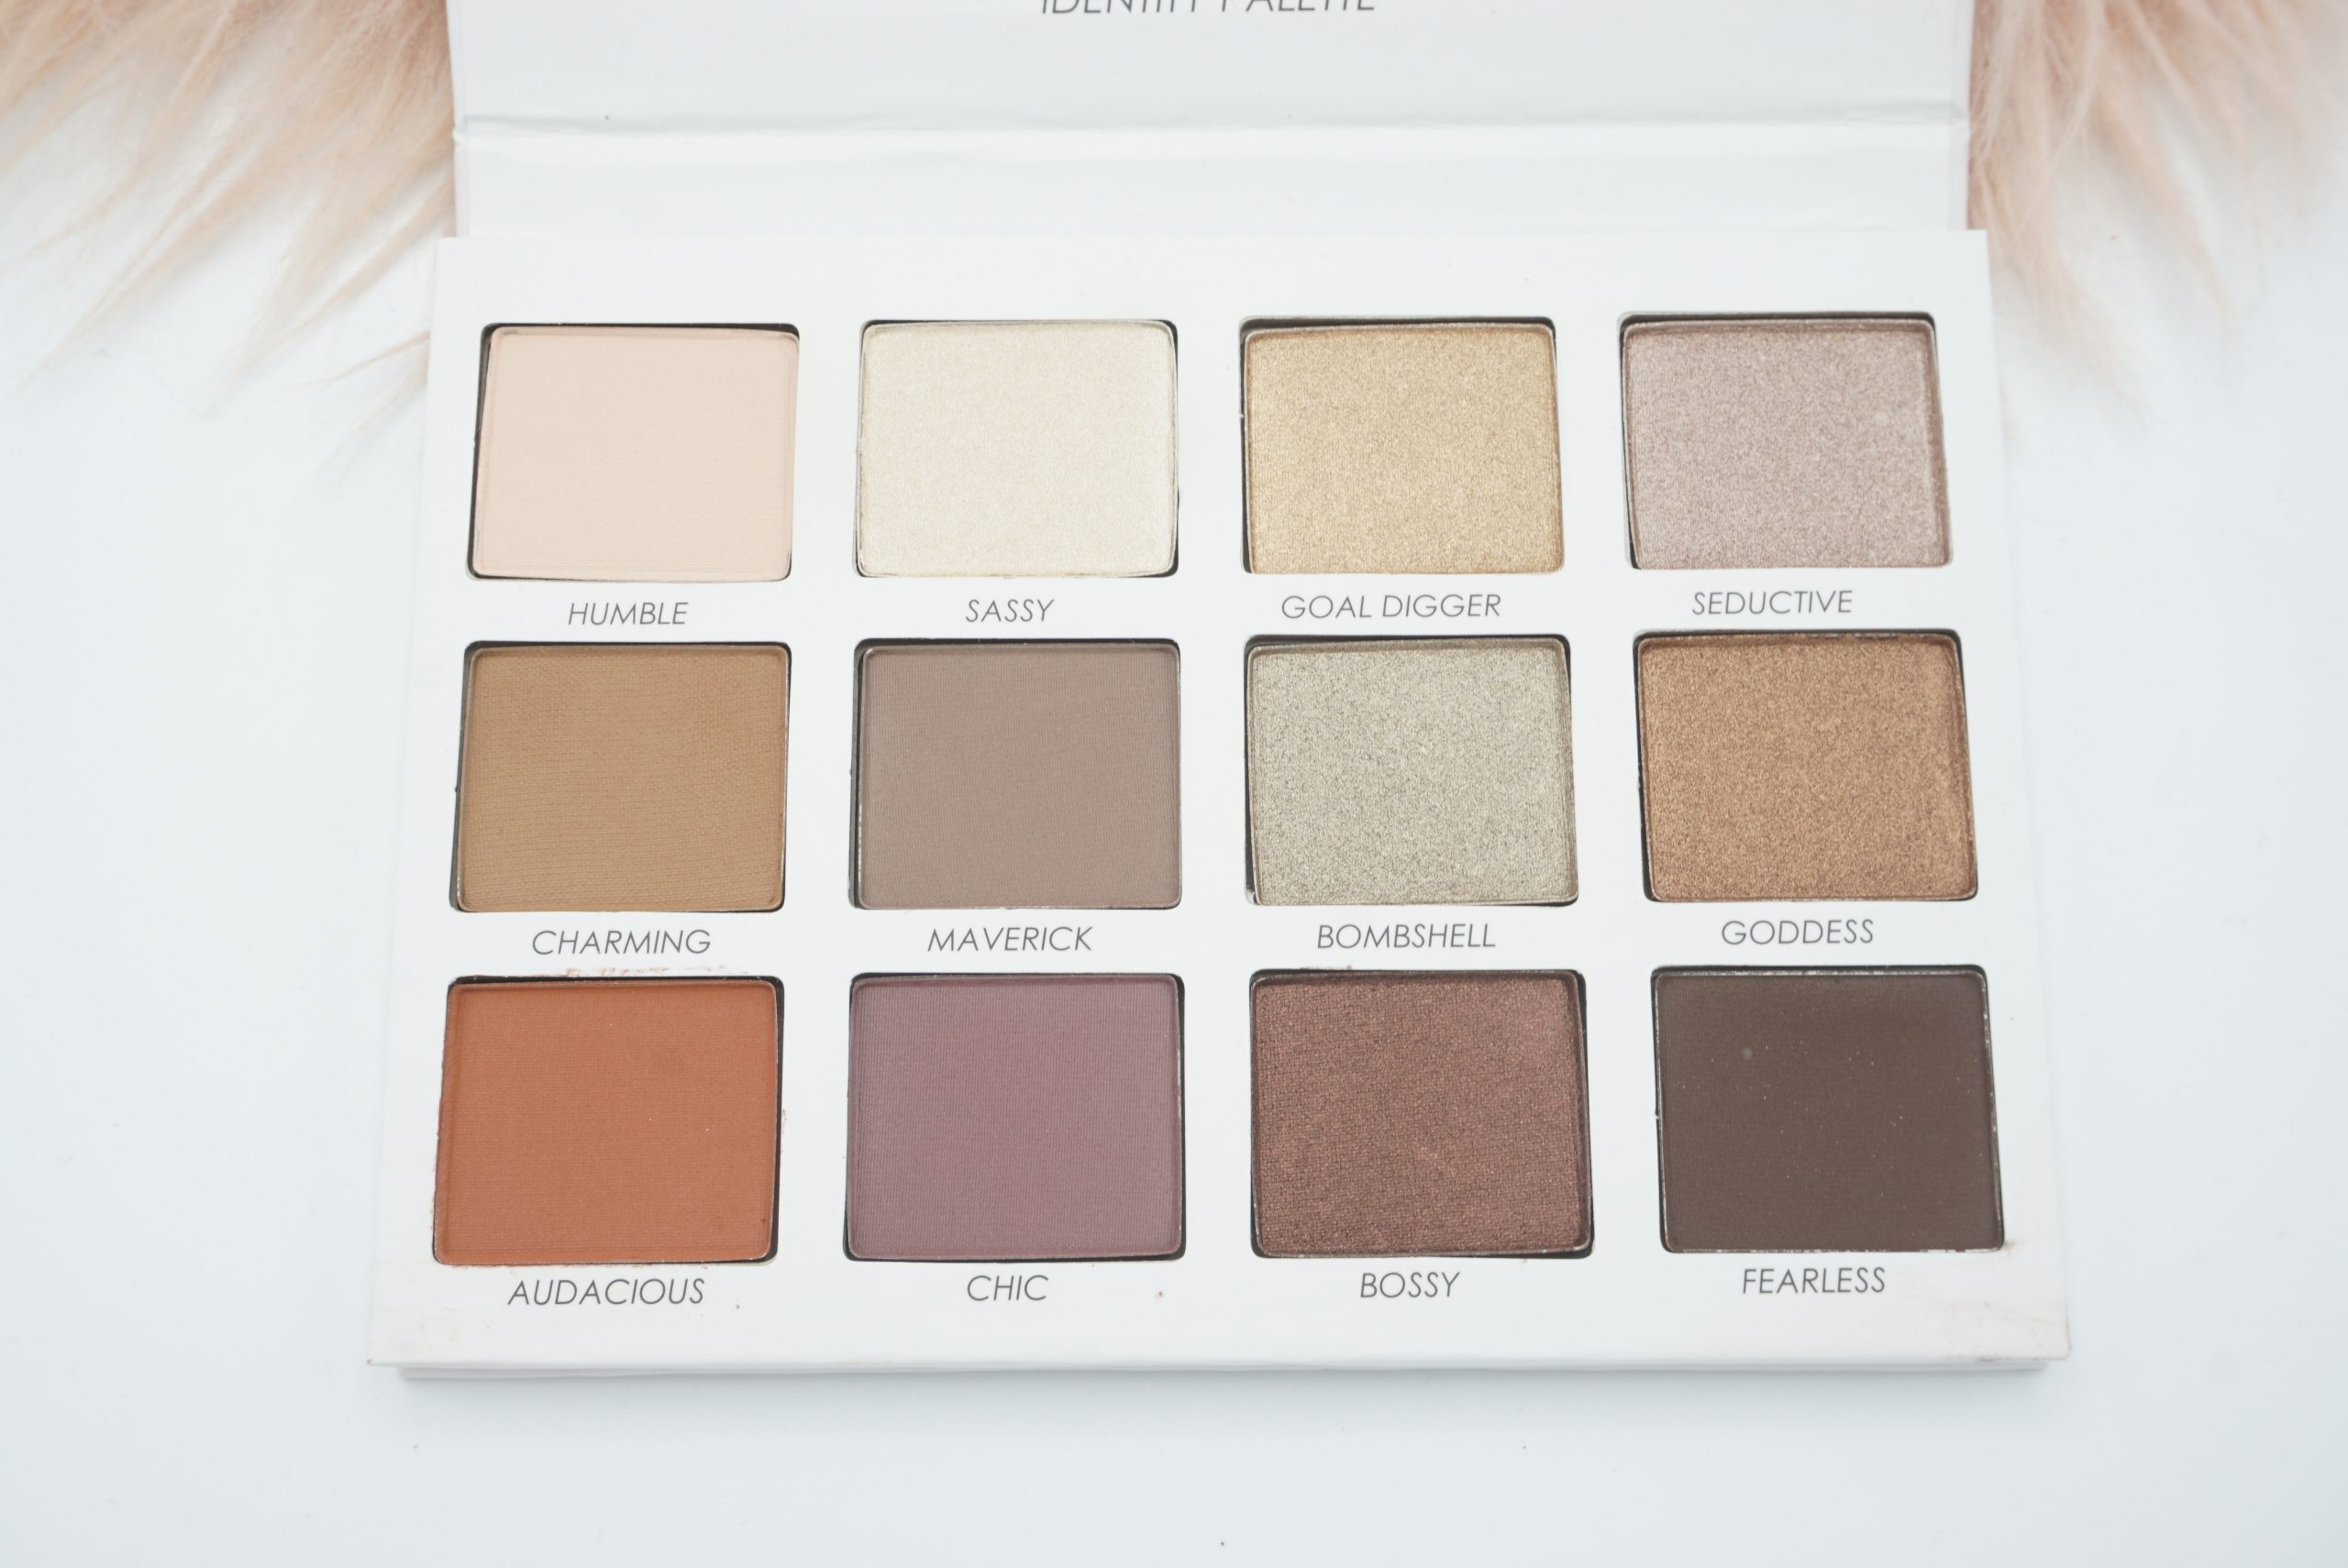 PERSONA COSMETICS IDENTITY PALETTE REVIEW